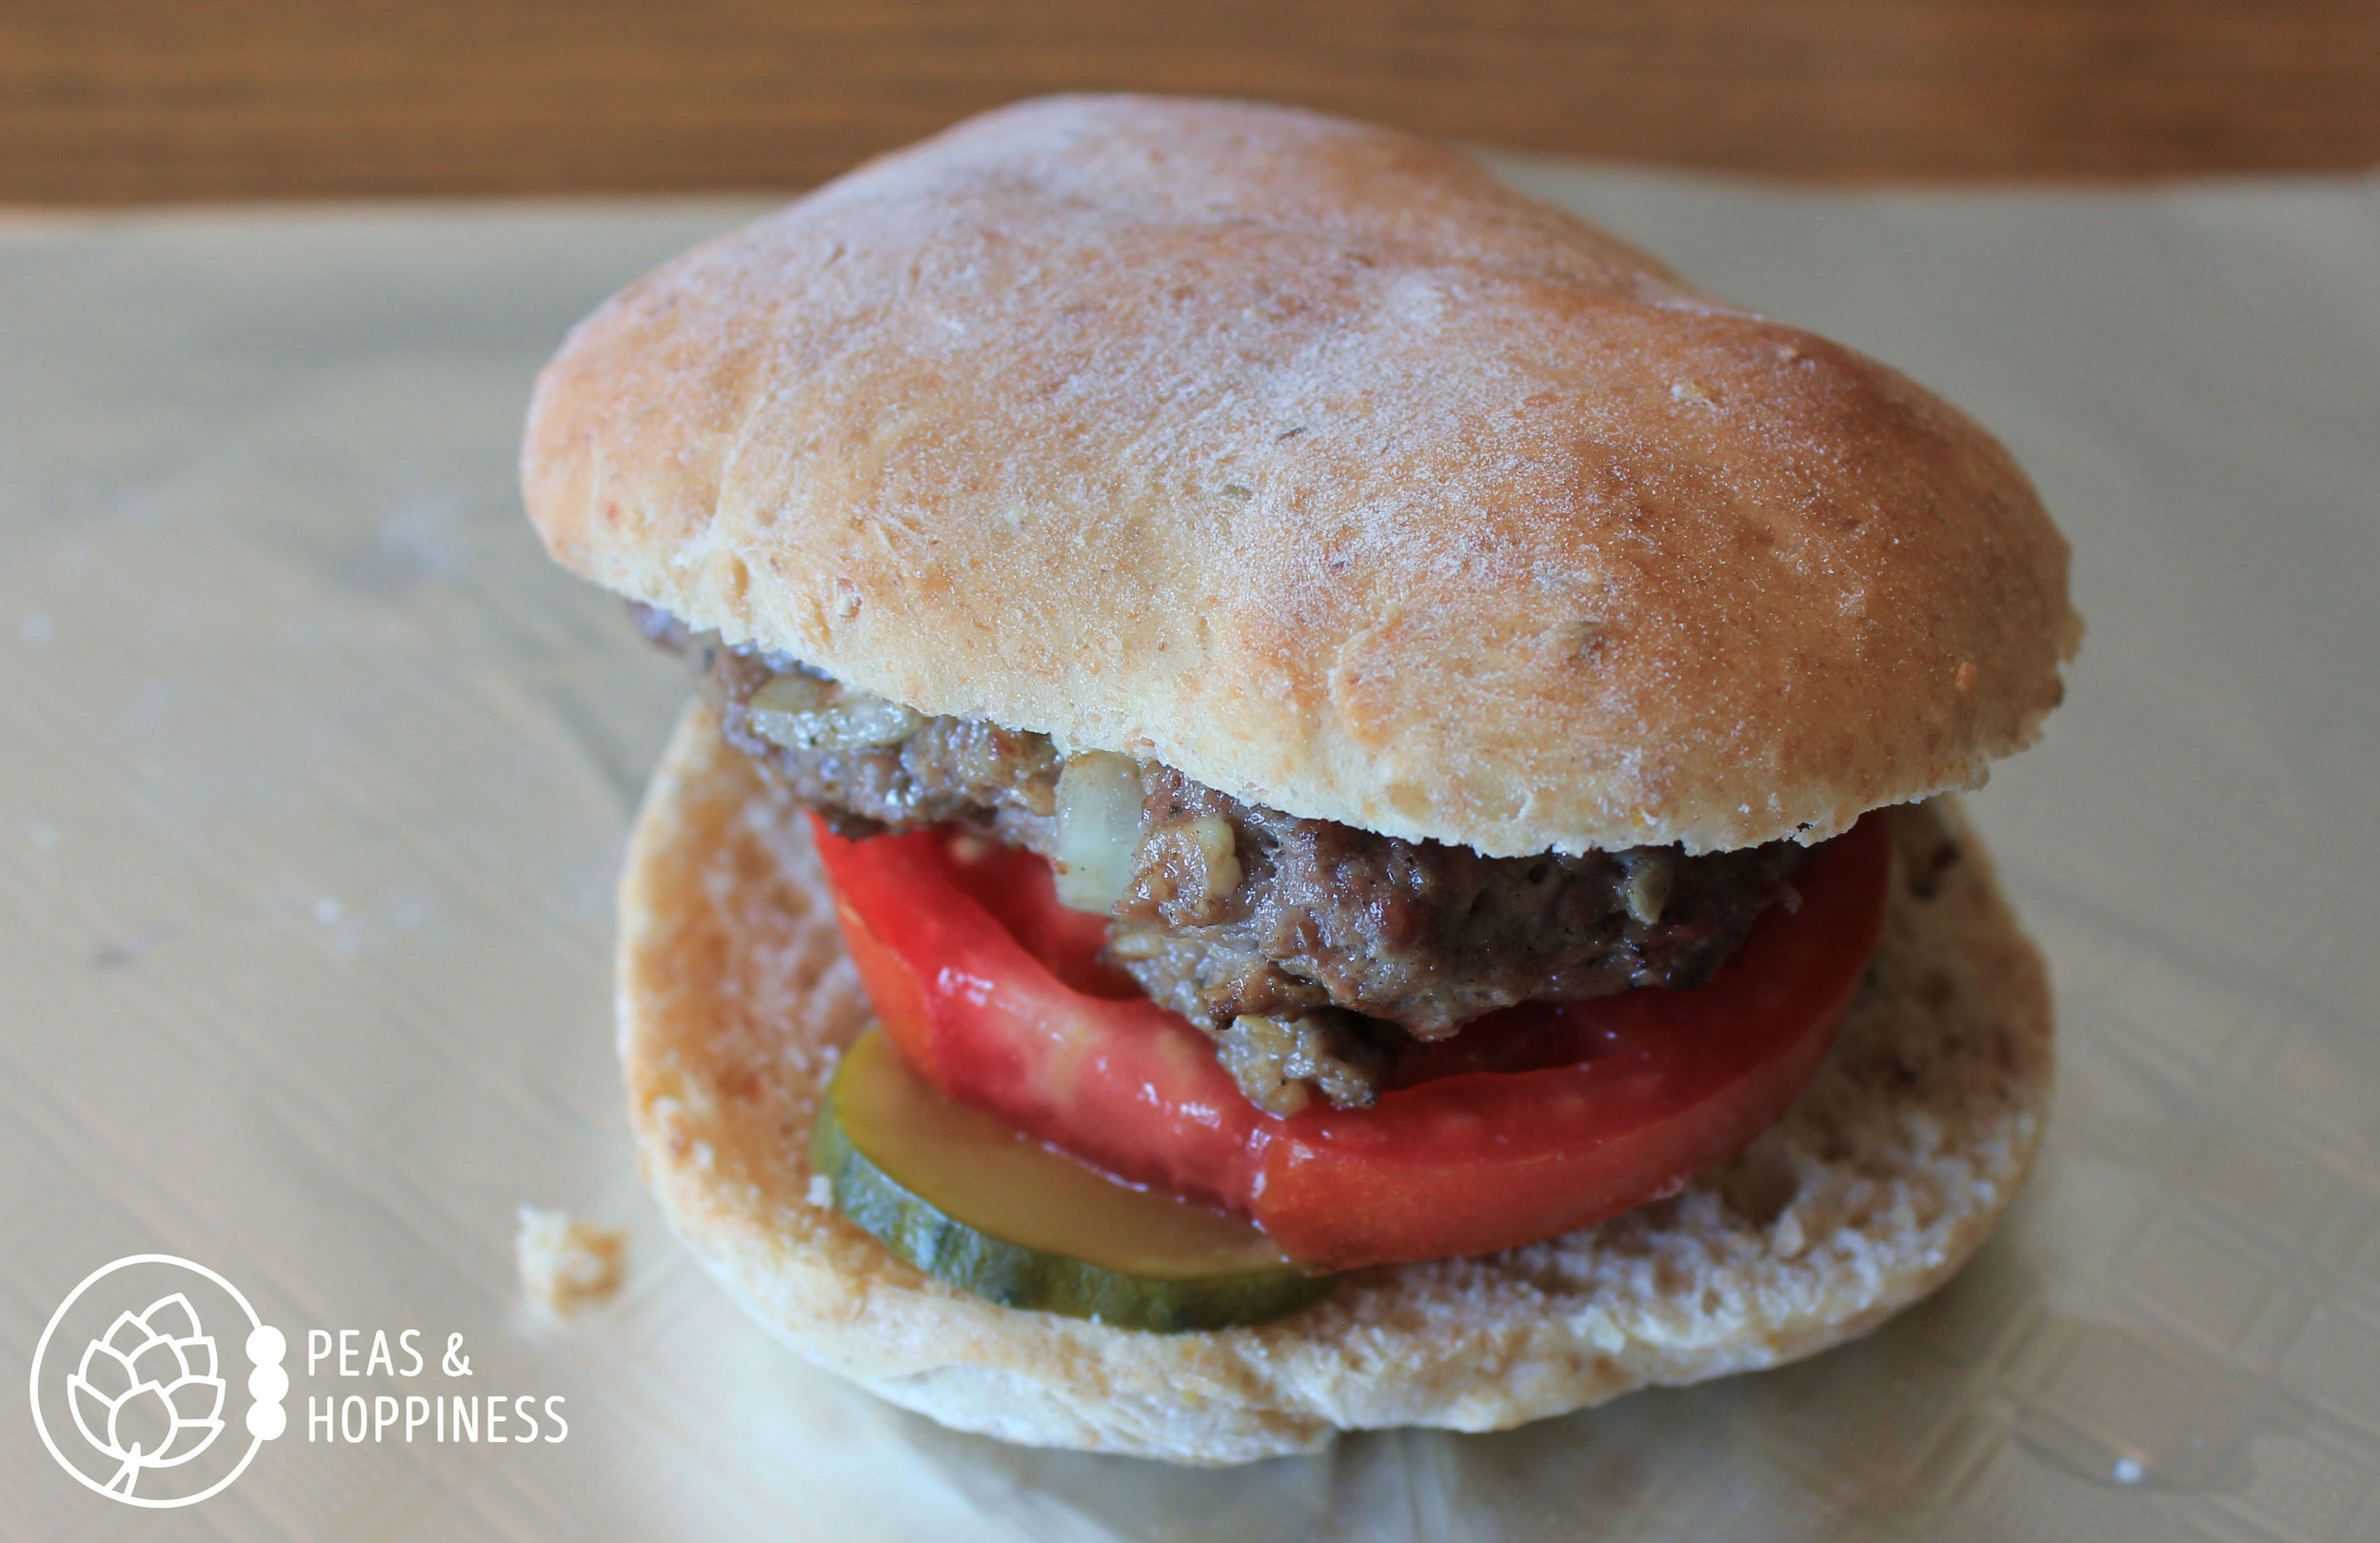 Homemade bun, hand-crafted burger. This is farm life at Scheufler Farms.